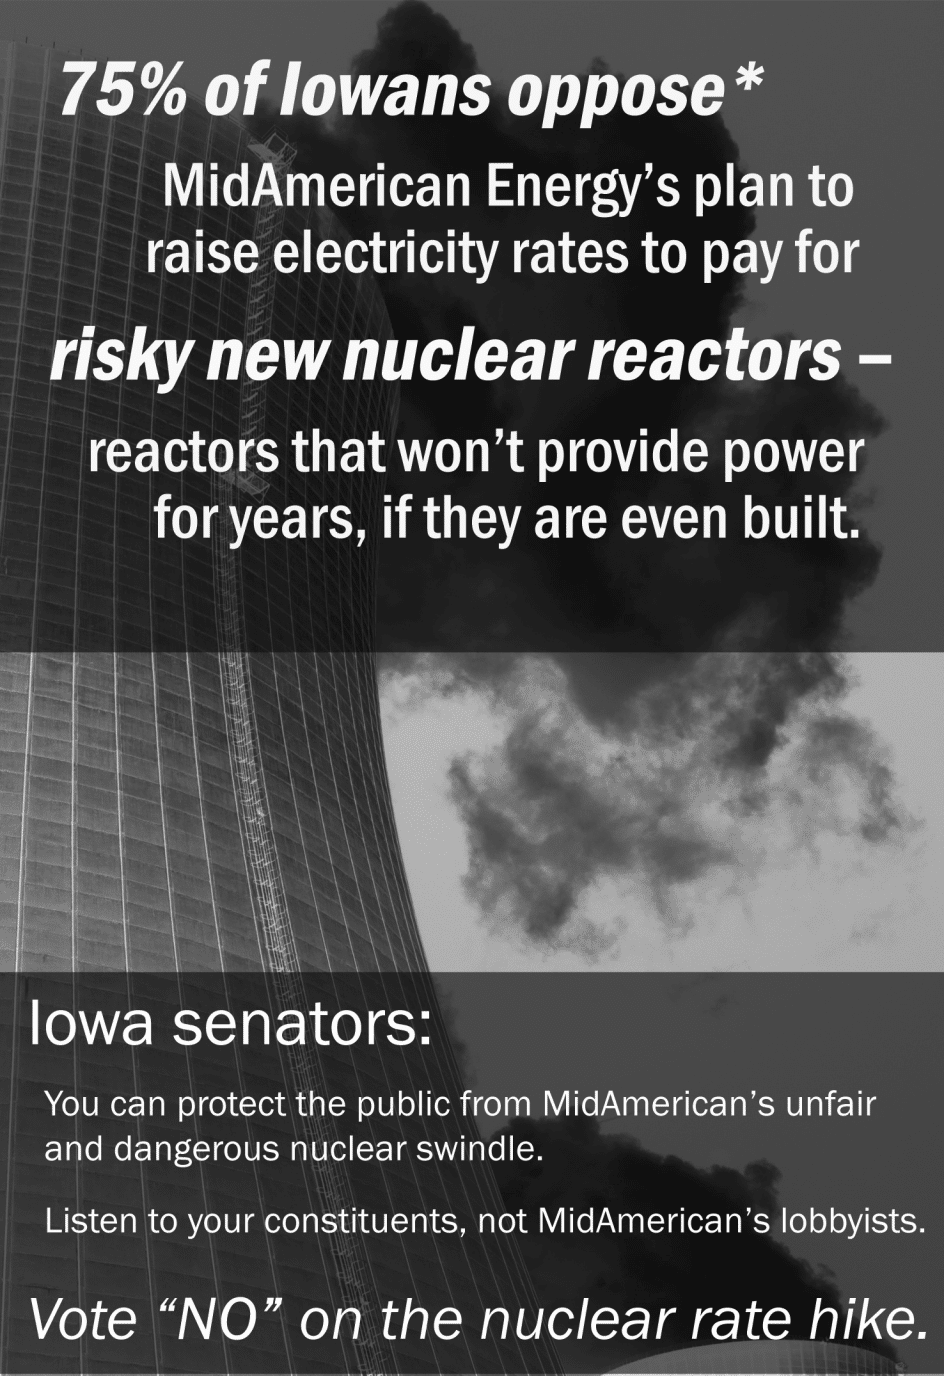 Mid-American’s Nuclear Rate Hike